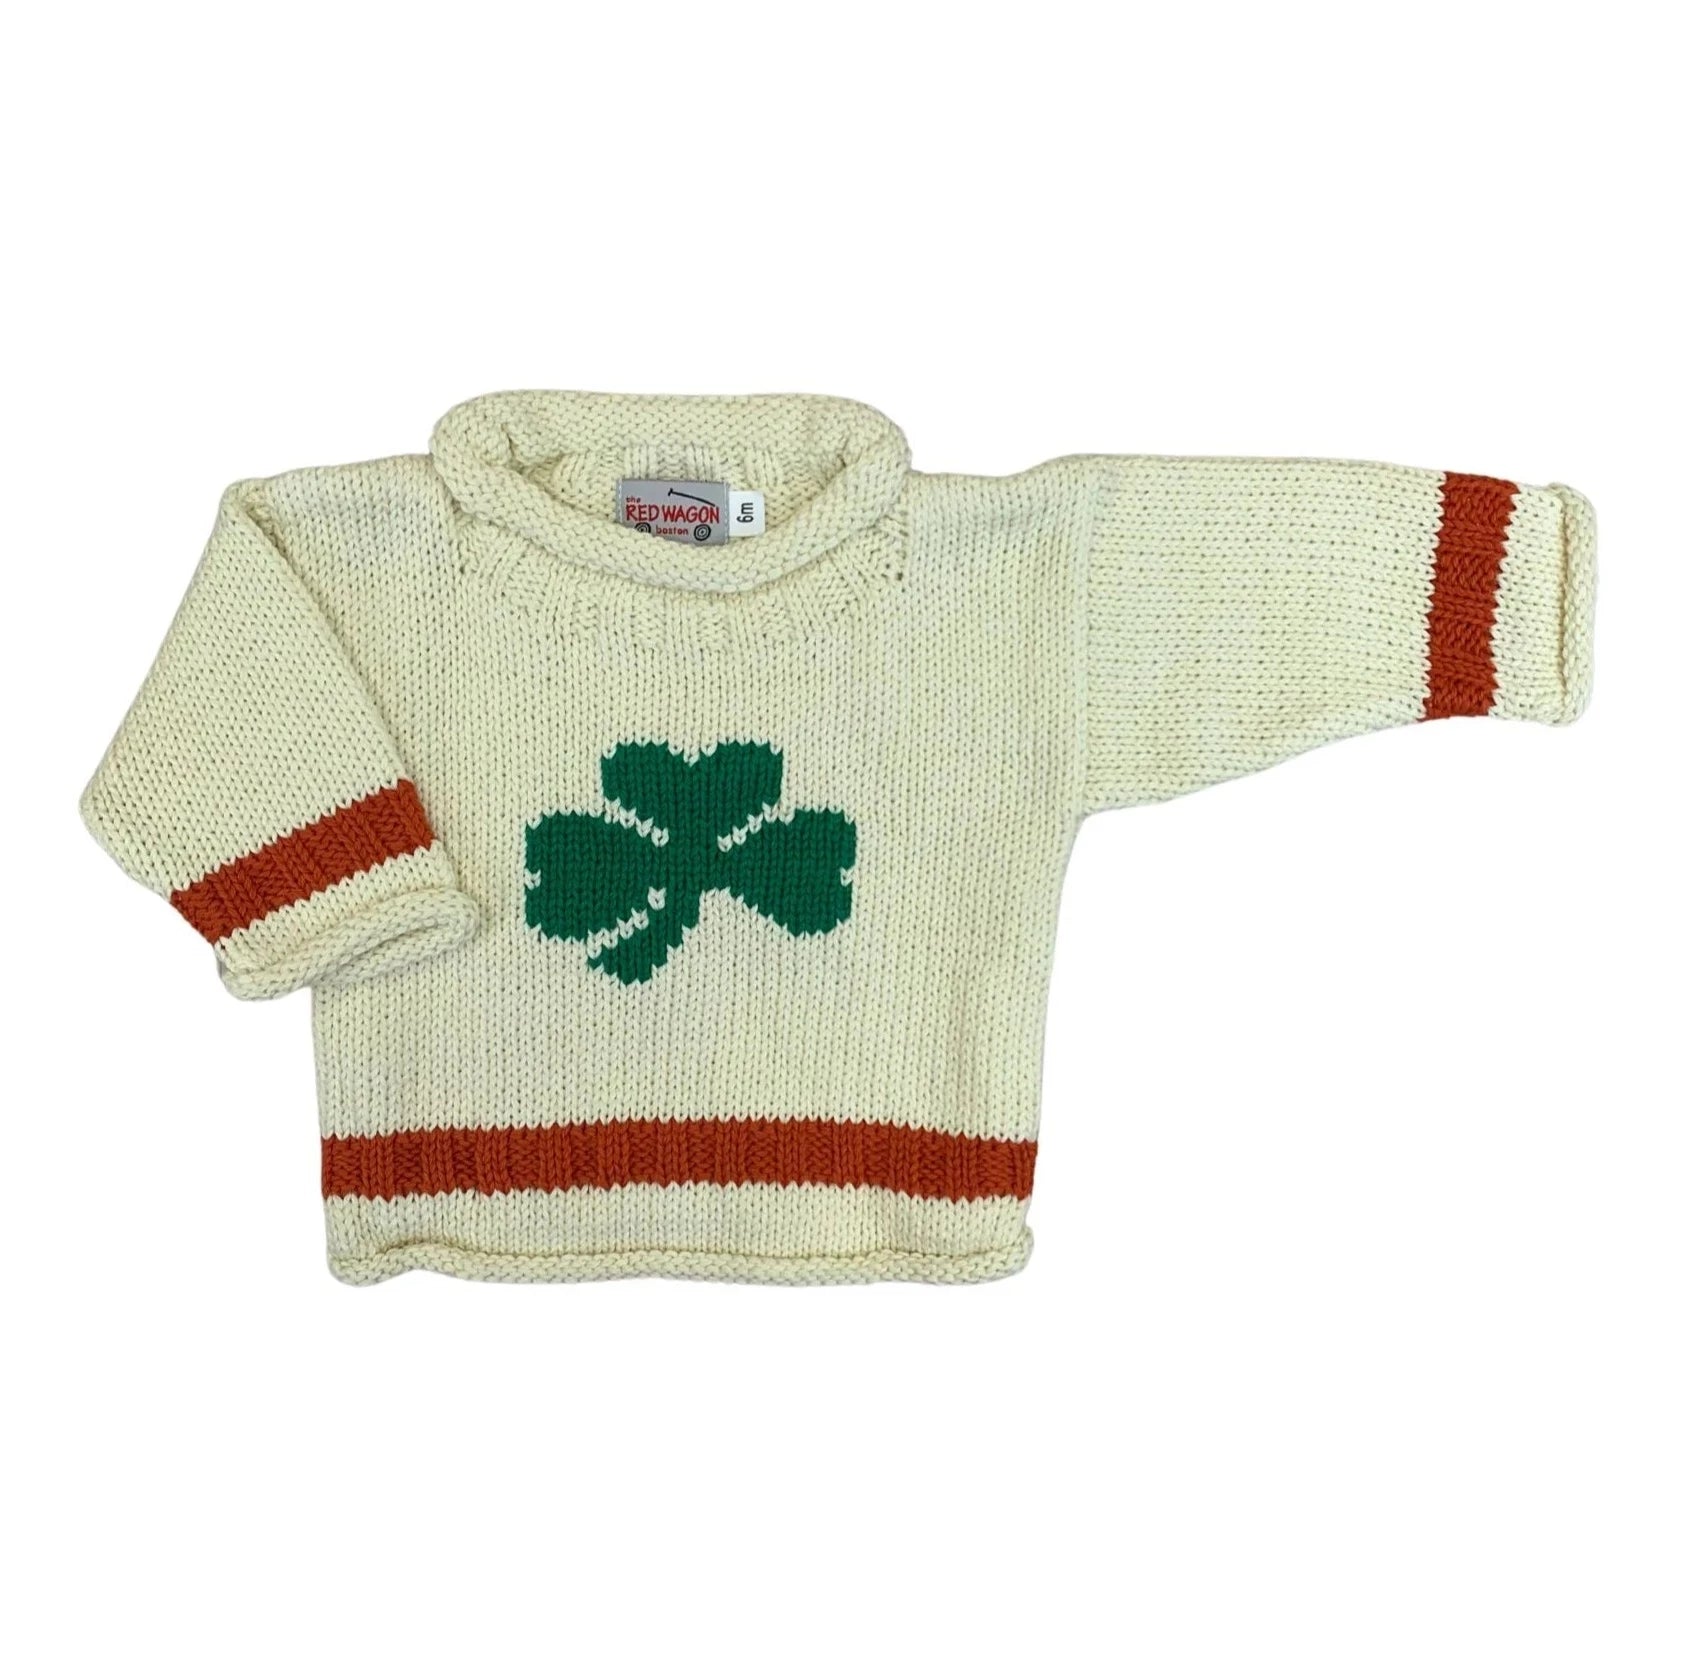 ivory long sleeve sweater with single green shamrock in center, orange stripe on each wrist and one stripe at bottom